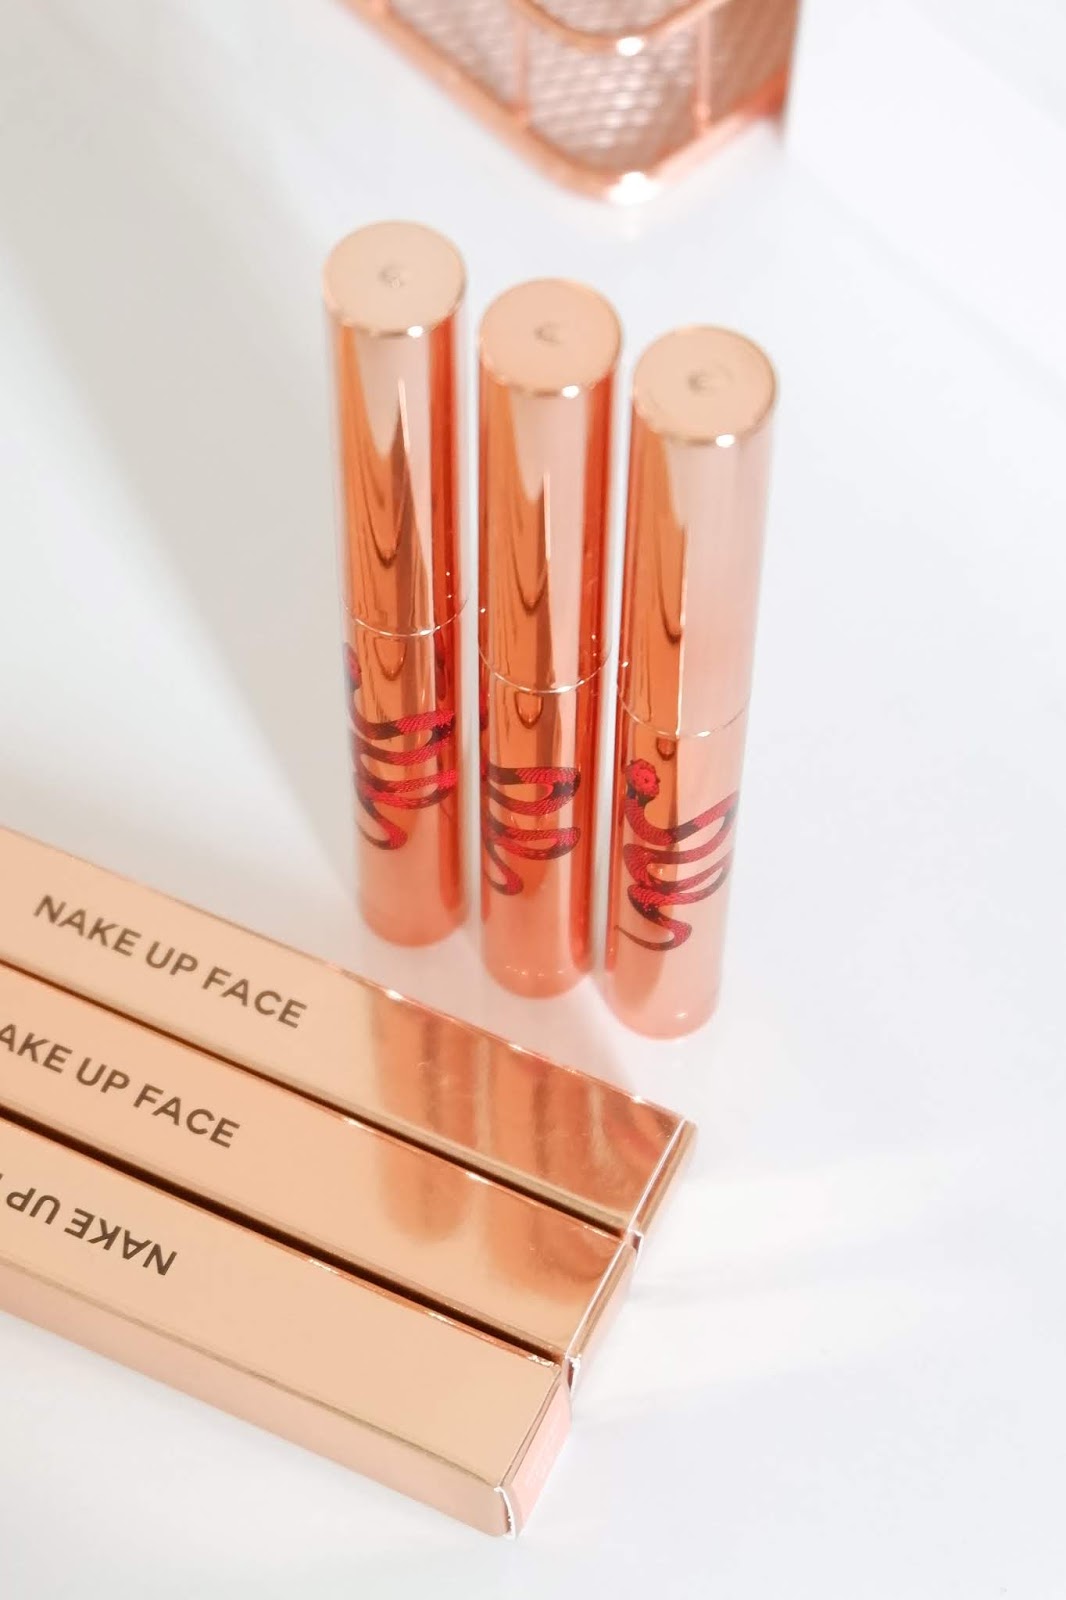 NAKEUP FACE: ONE NIGHT LIPSTICK REVIEW